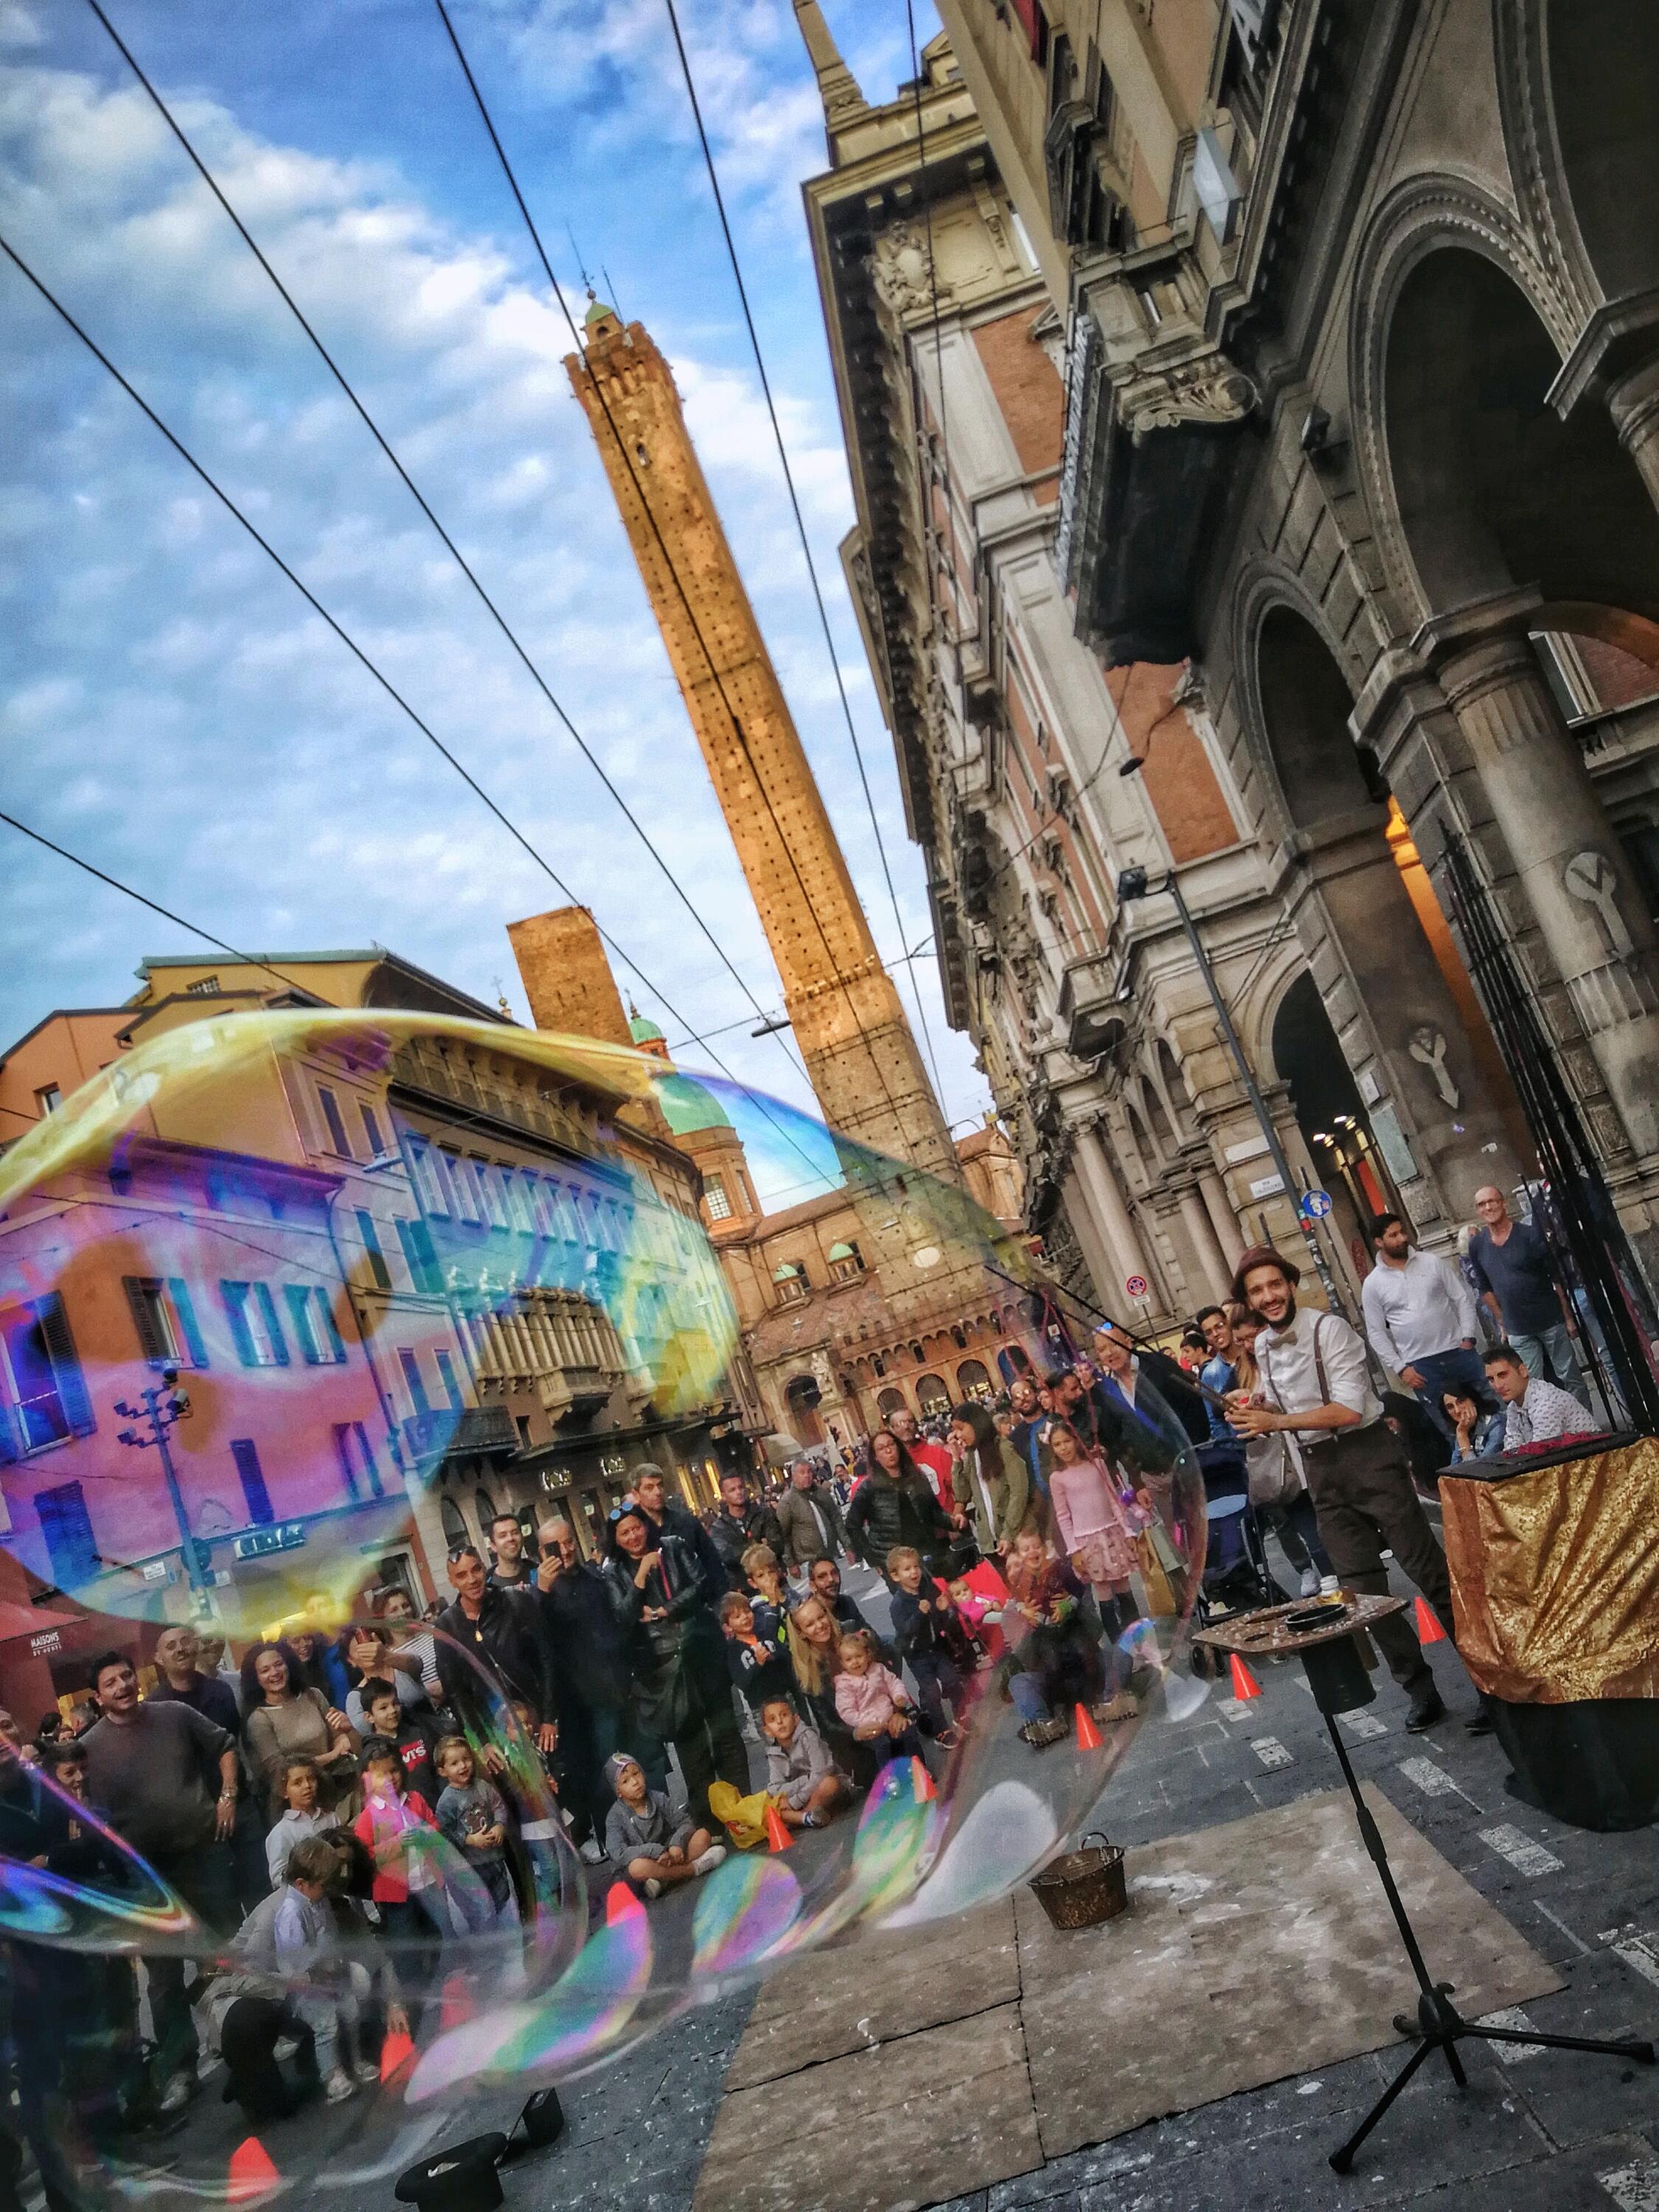 Buskers performs for crowd in Bologna street